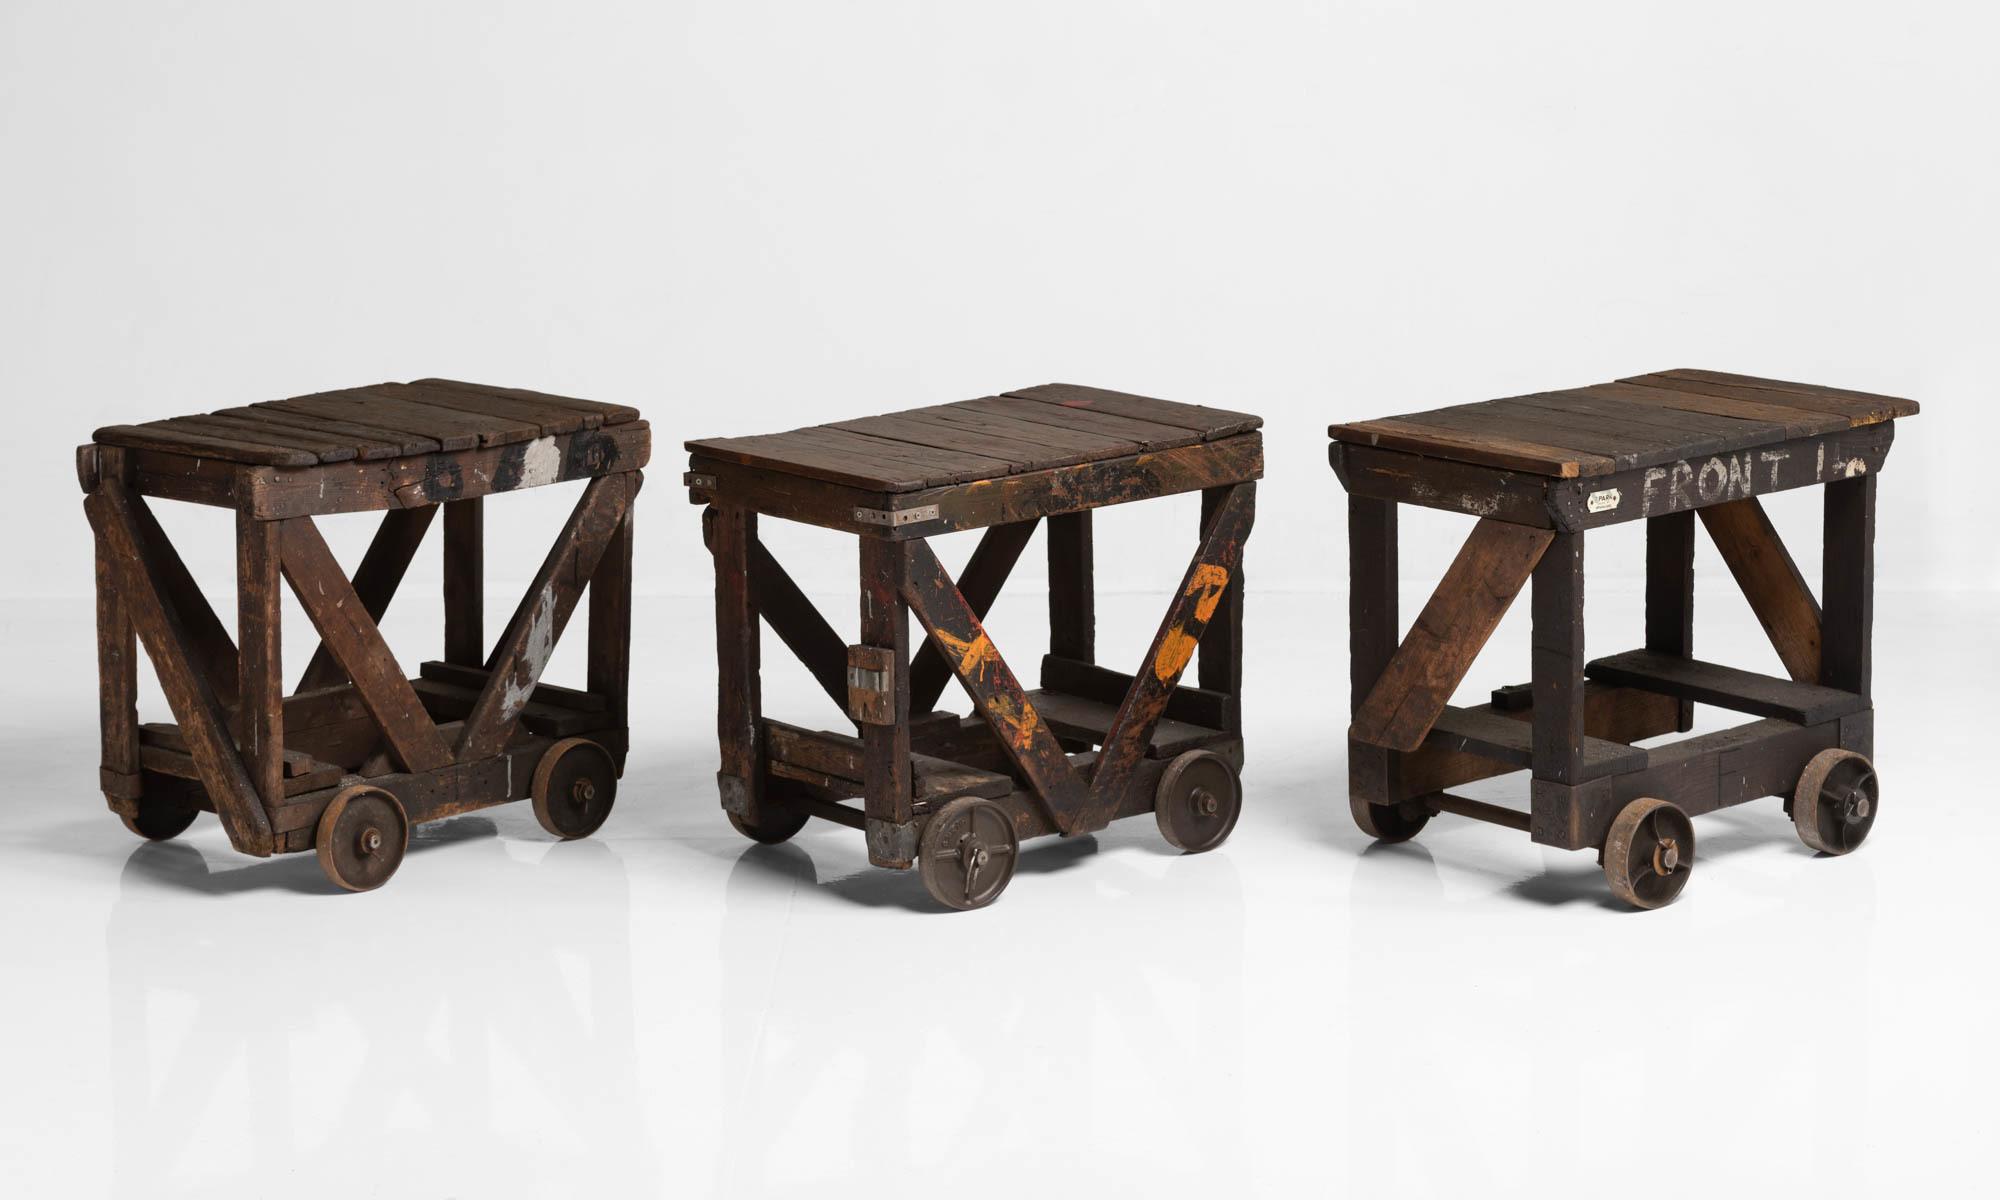 Industrial wheel table, England, circa 1940

Heavily patinated, unique table with solid construction and heavy, functional wheels as a base. Each cart has slight variations in size with some featuring painted elements.